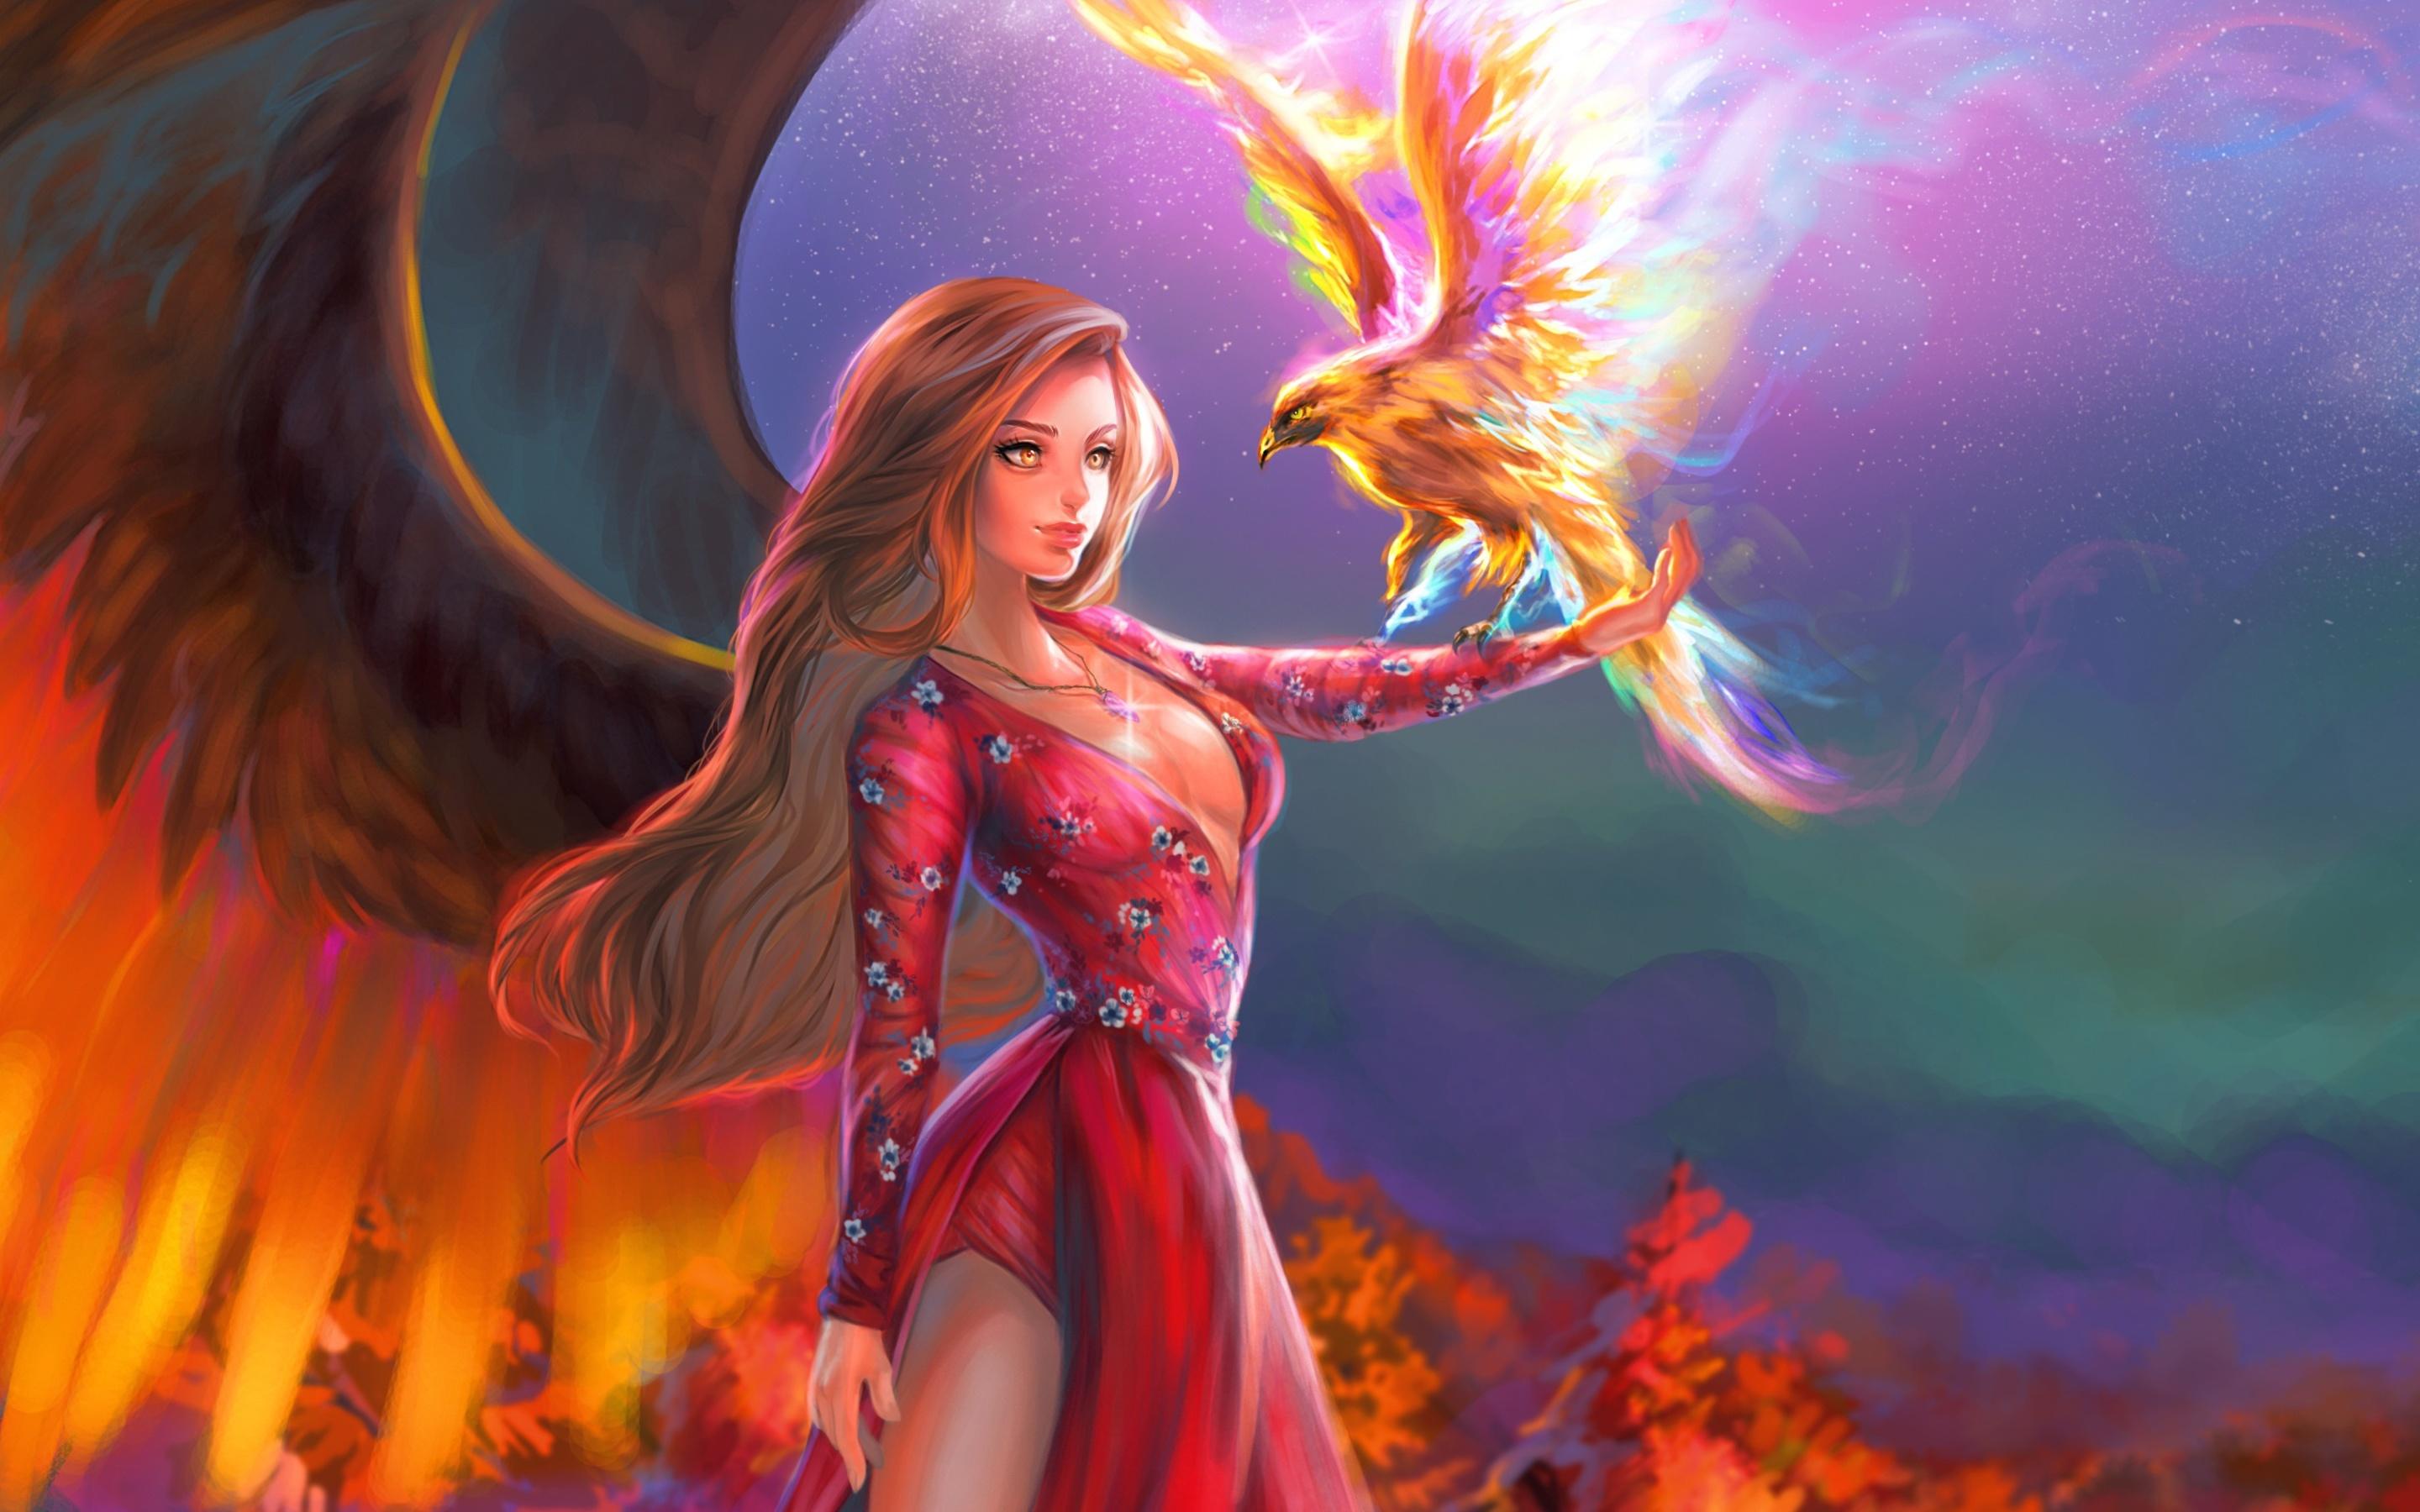 Mythology fantasy girl with a phoenix bird which is cyclically